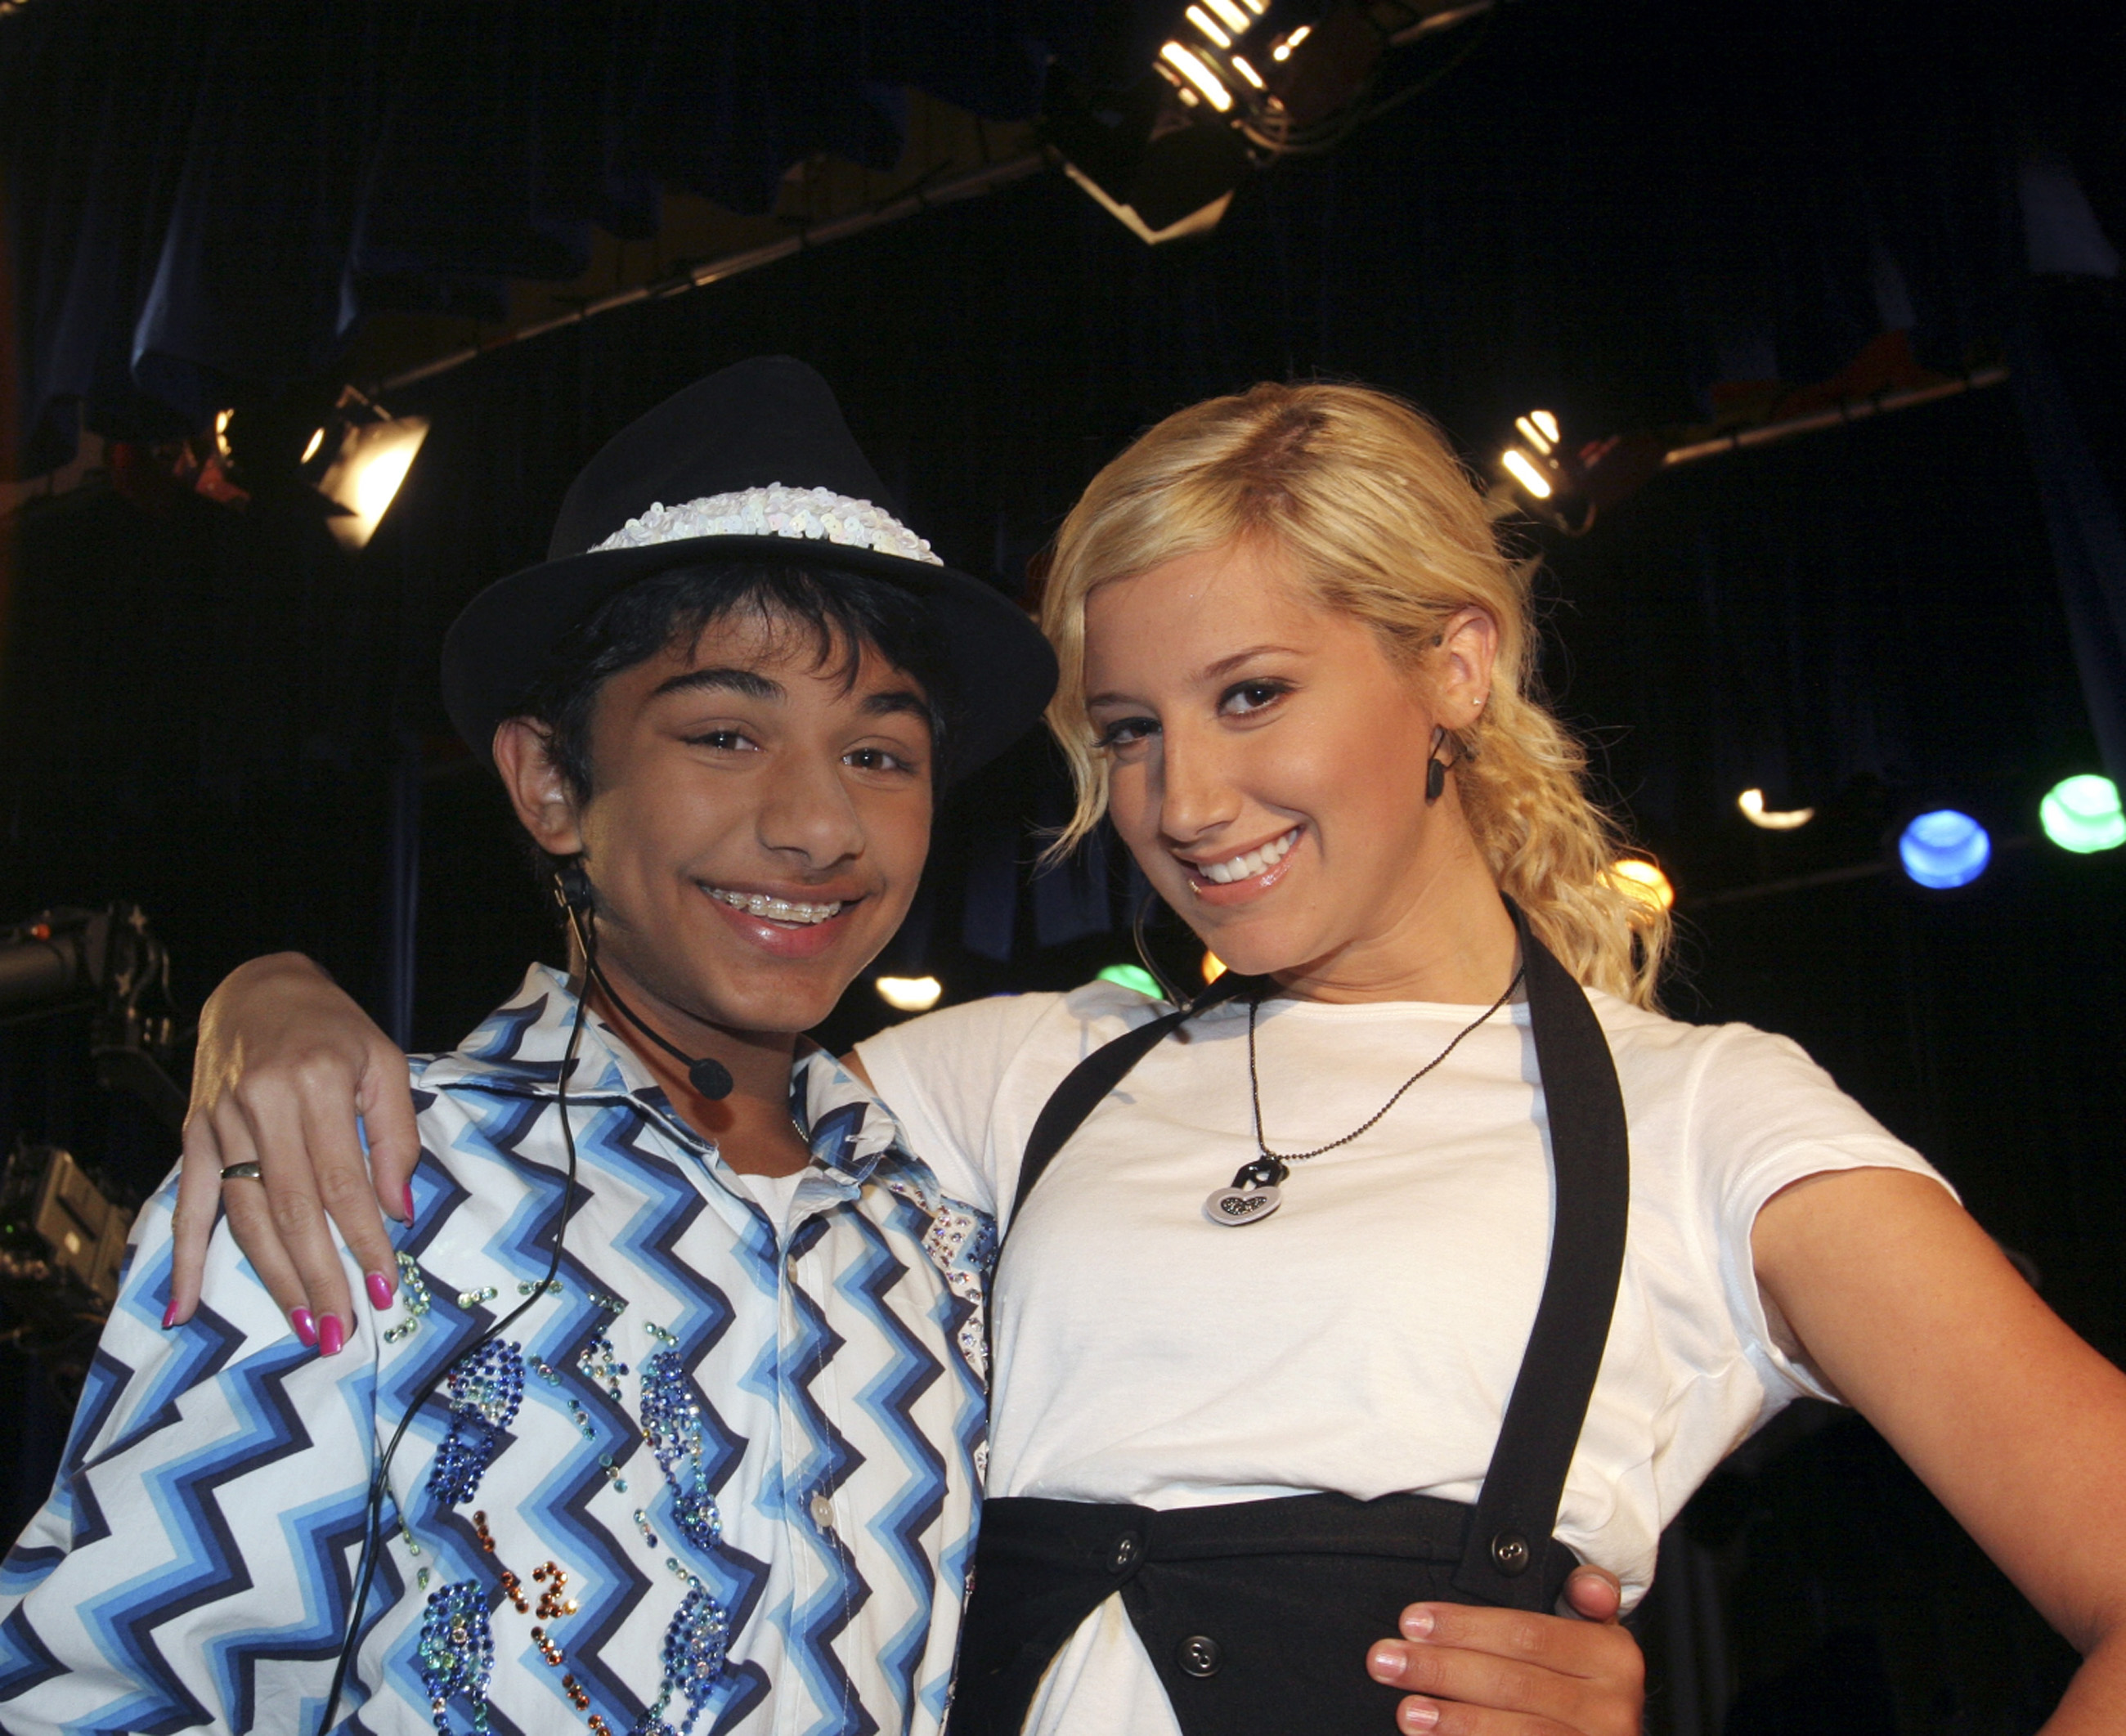 Ashley Tisdale in The Suite Life of Zack and Cody (Season 3)